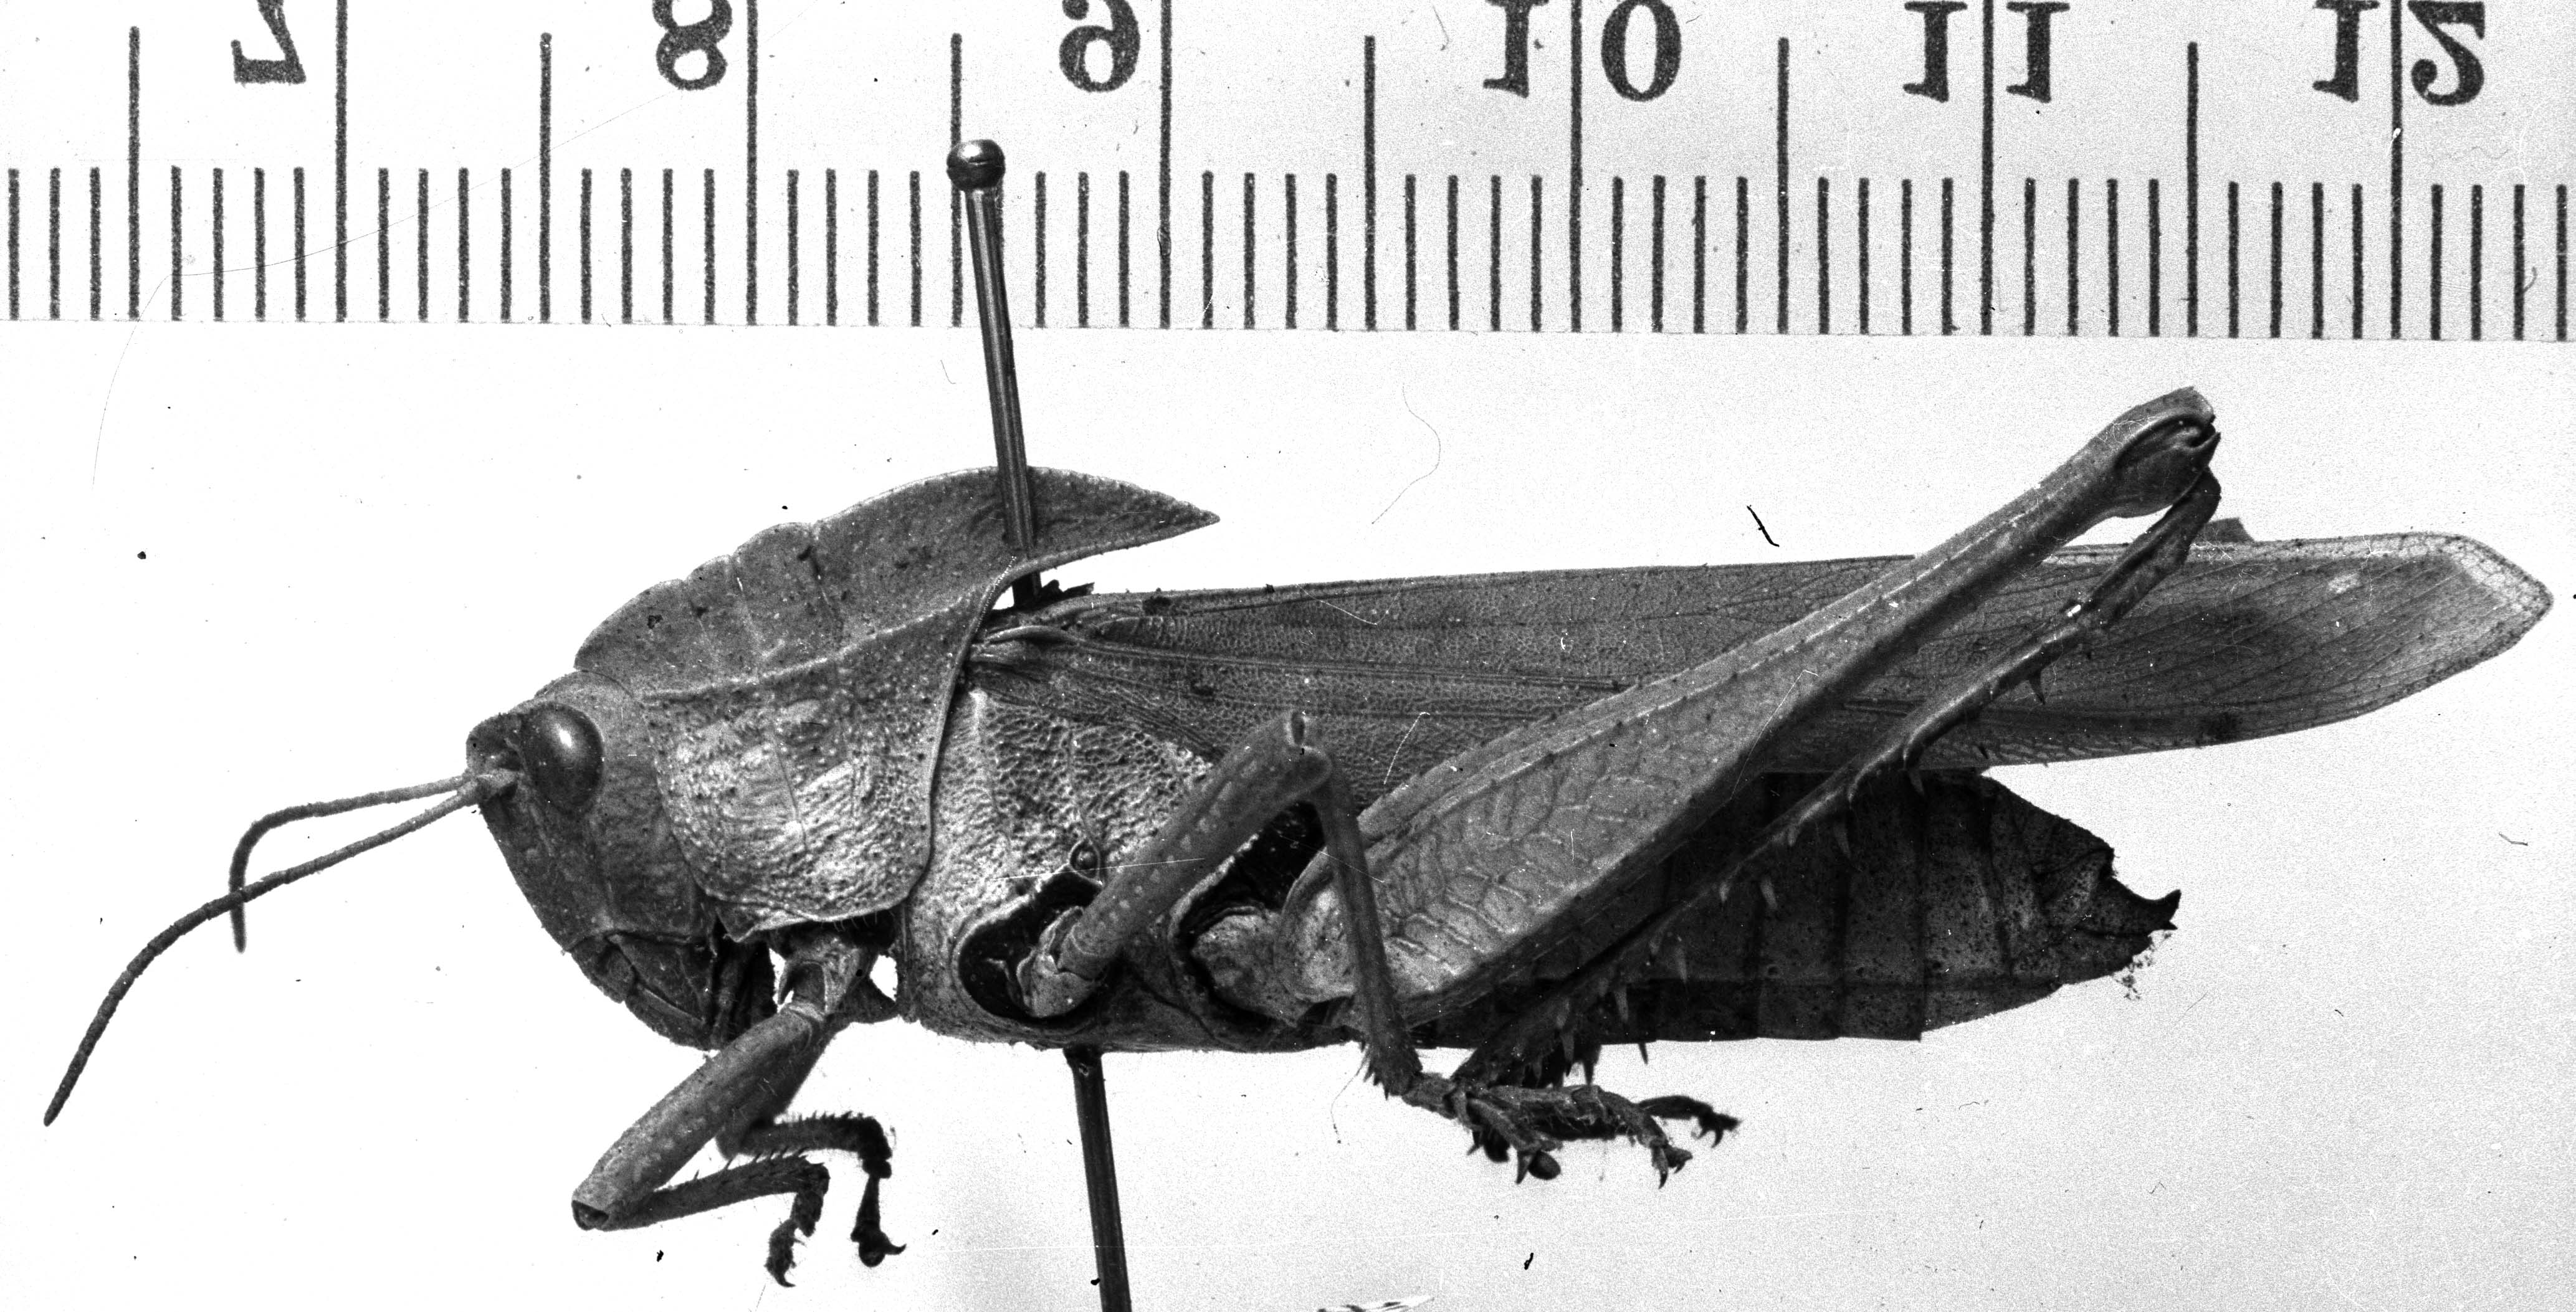 Image Carbonell, C.S female, lateral view (syntype of Tropidonotus scabripes). Depicts CollectionObject 1530633; 30d88560-628d-482f-83c7-3de6f4612474, a CollectionObject.